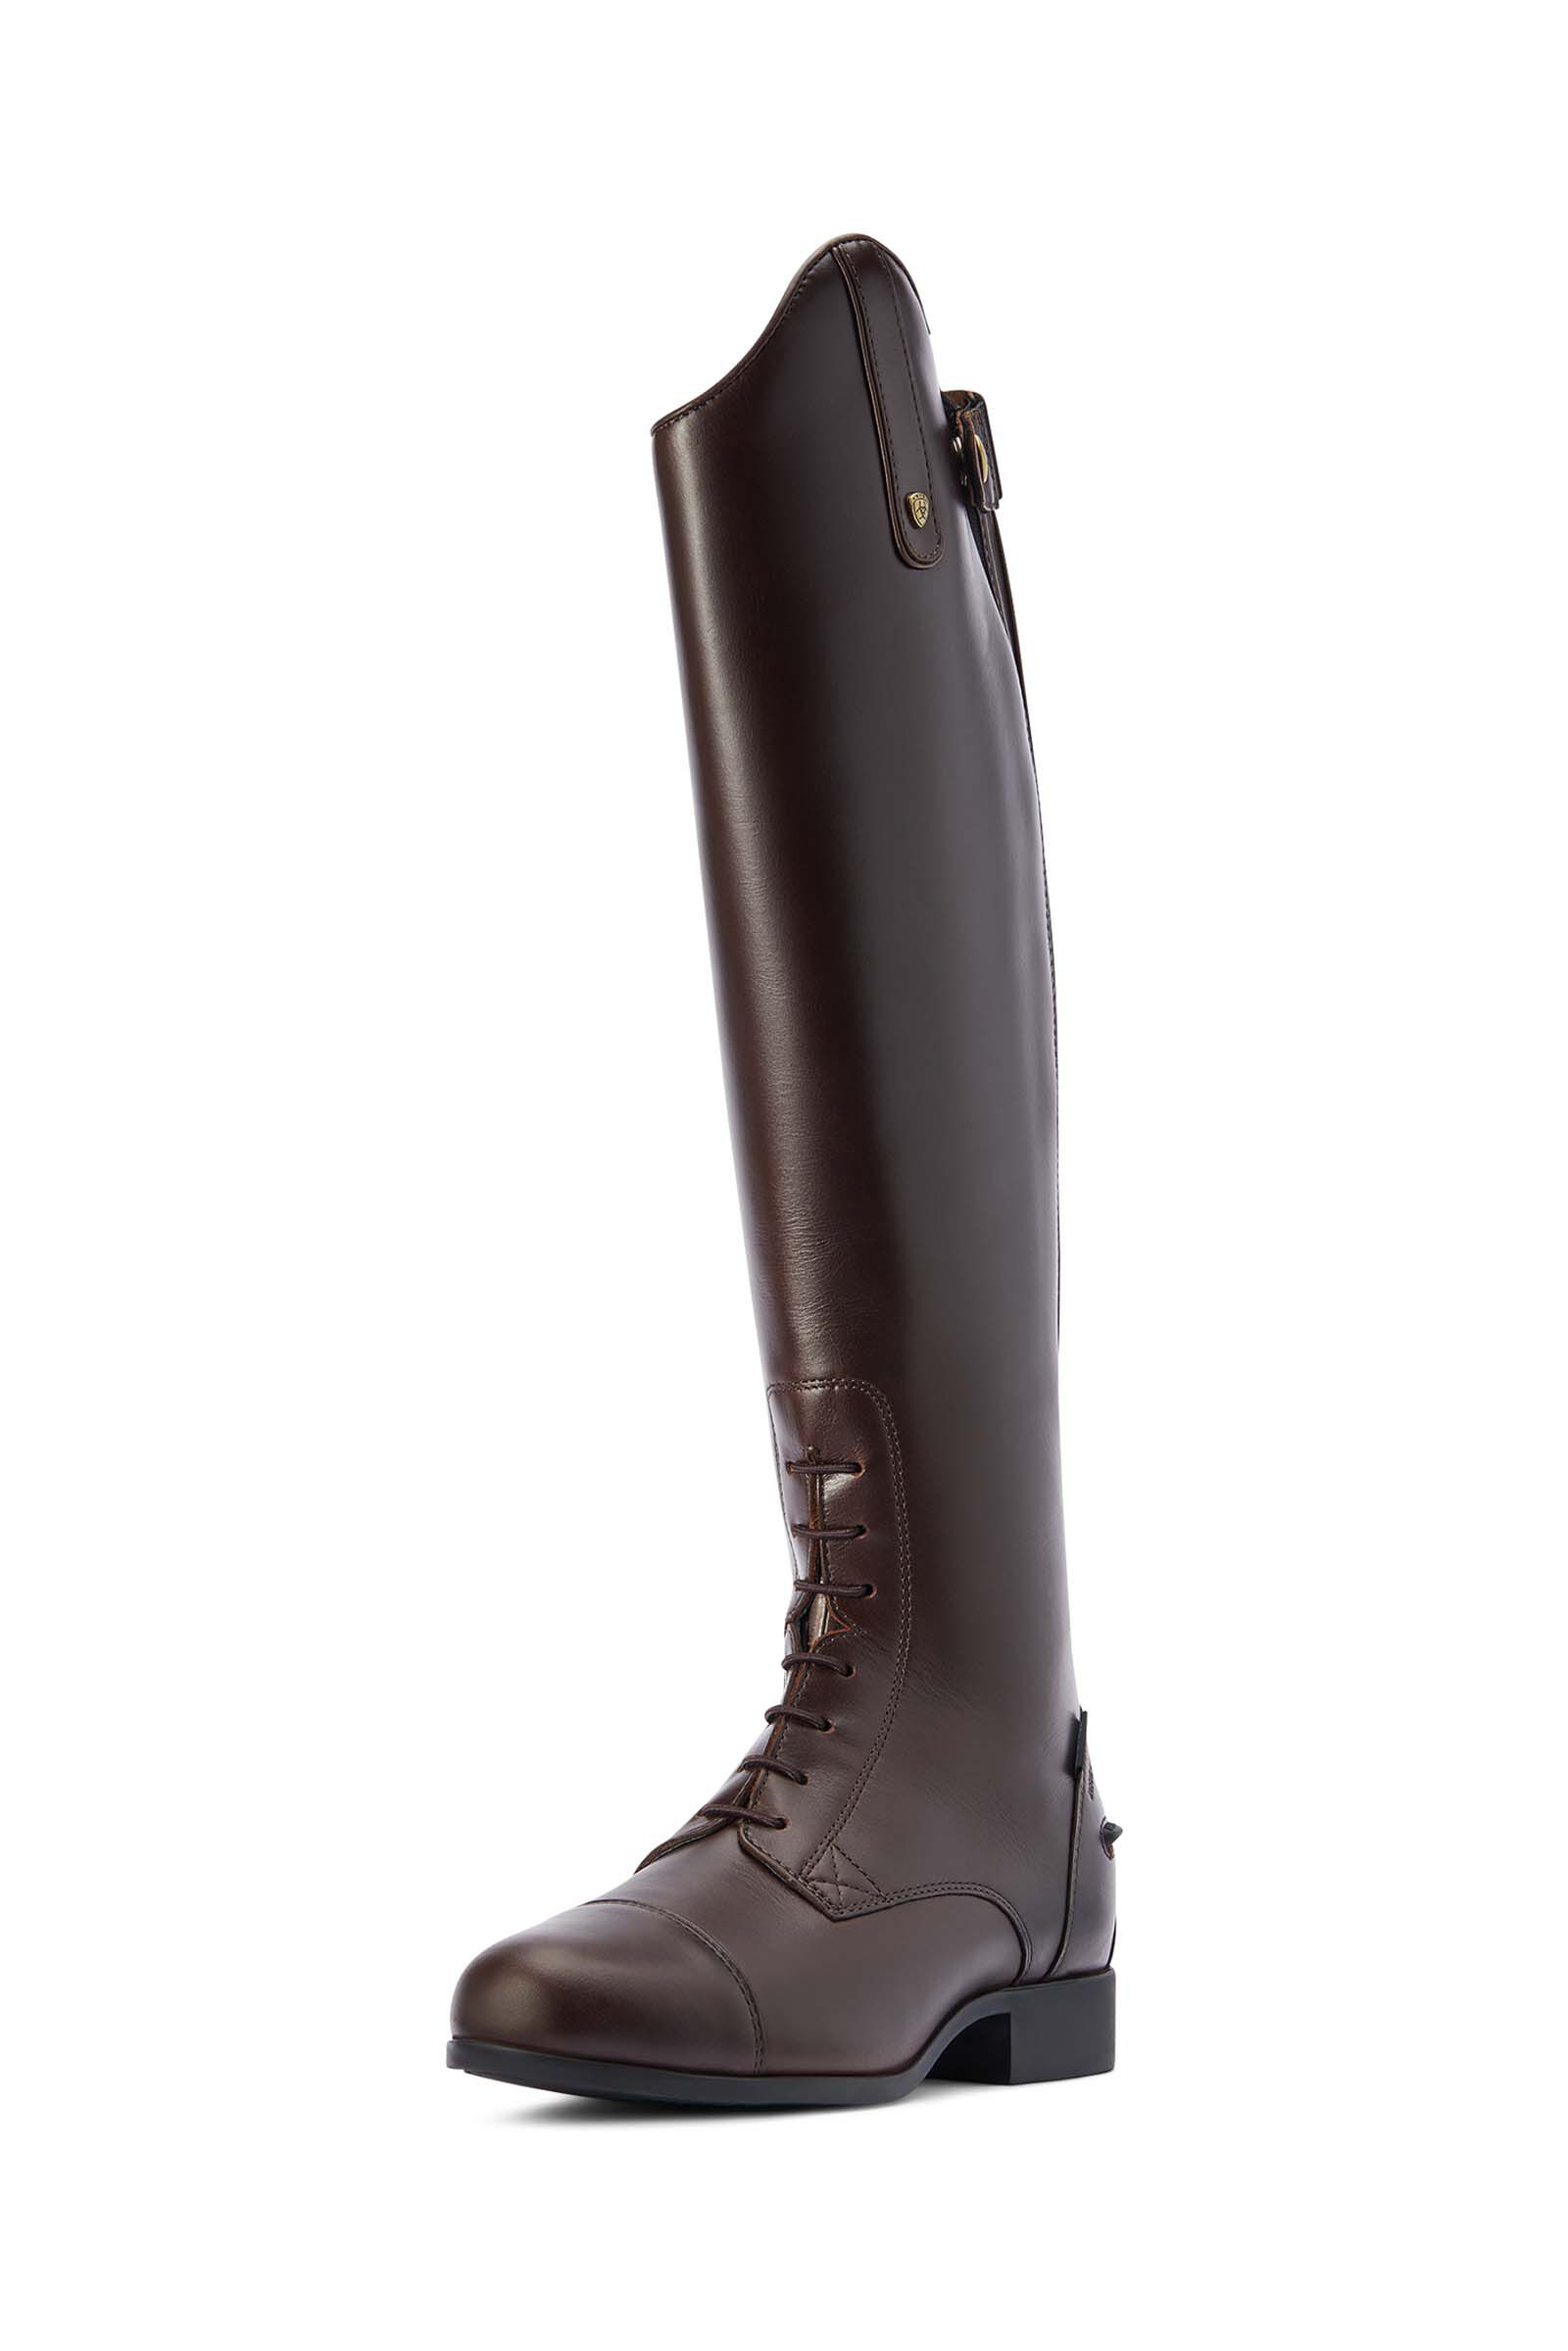 Buy Ariat Heritage Contour II H2O Insulated Women's Riding Boots